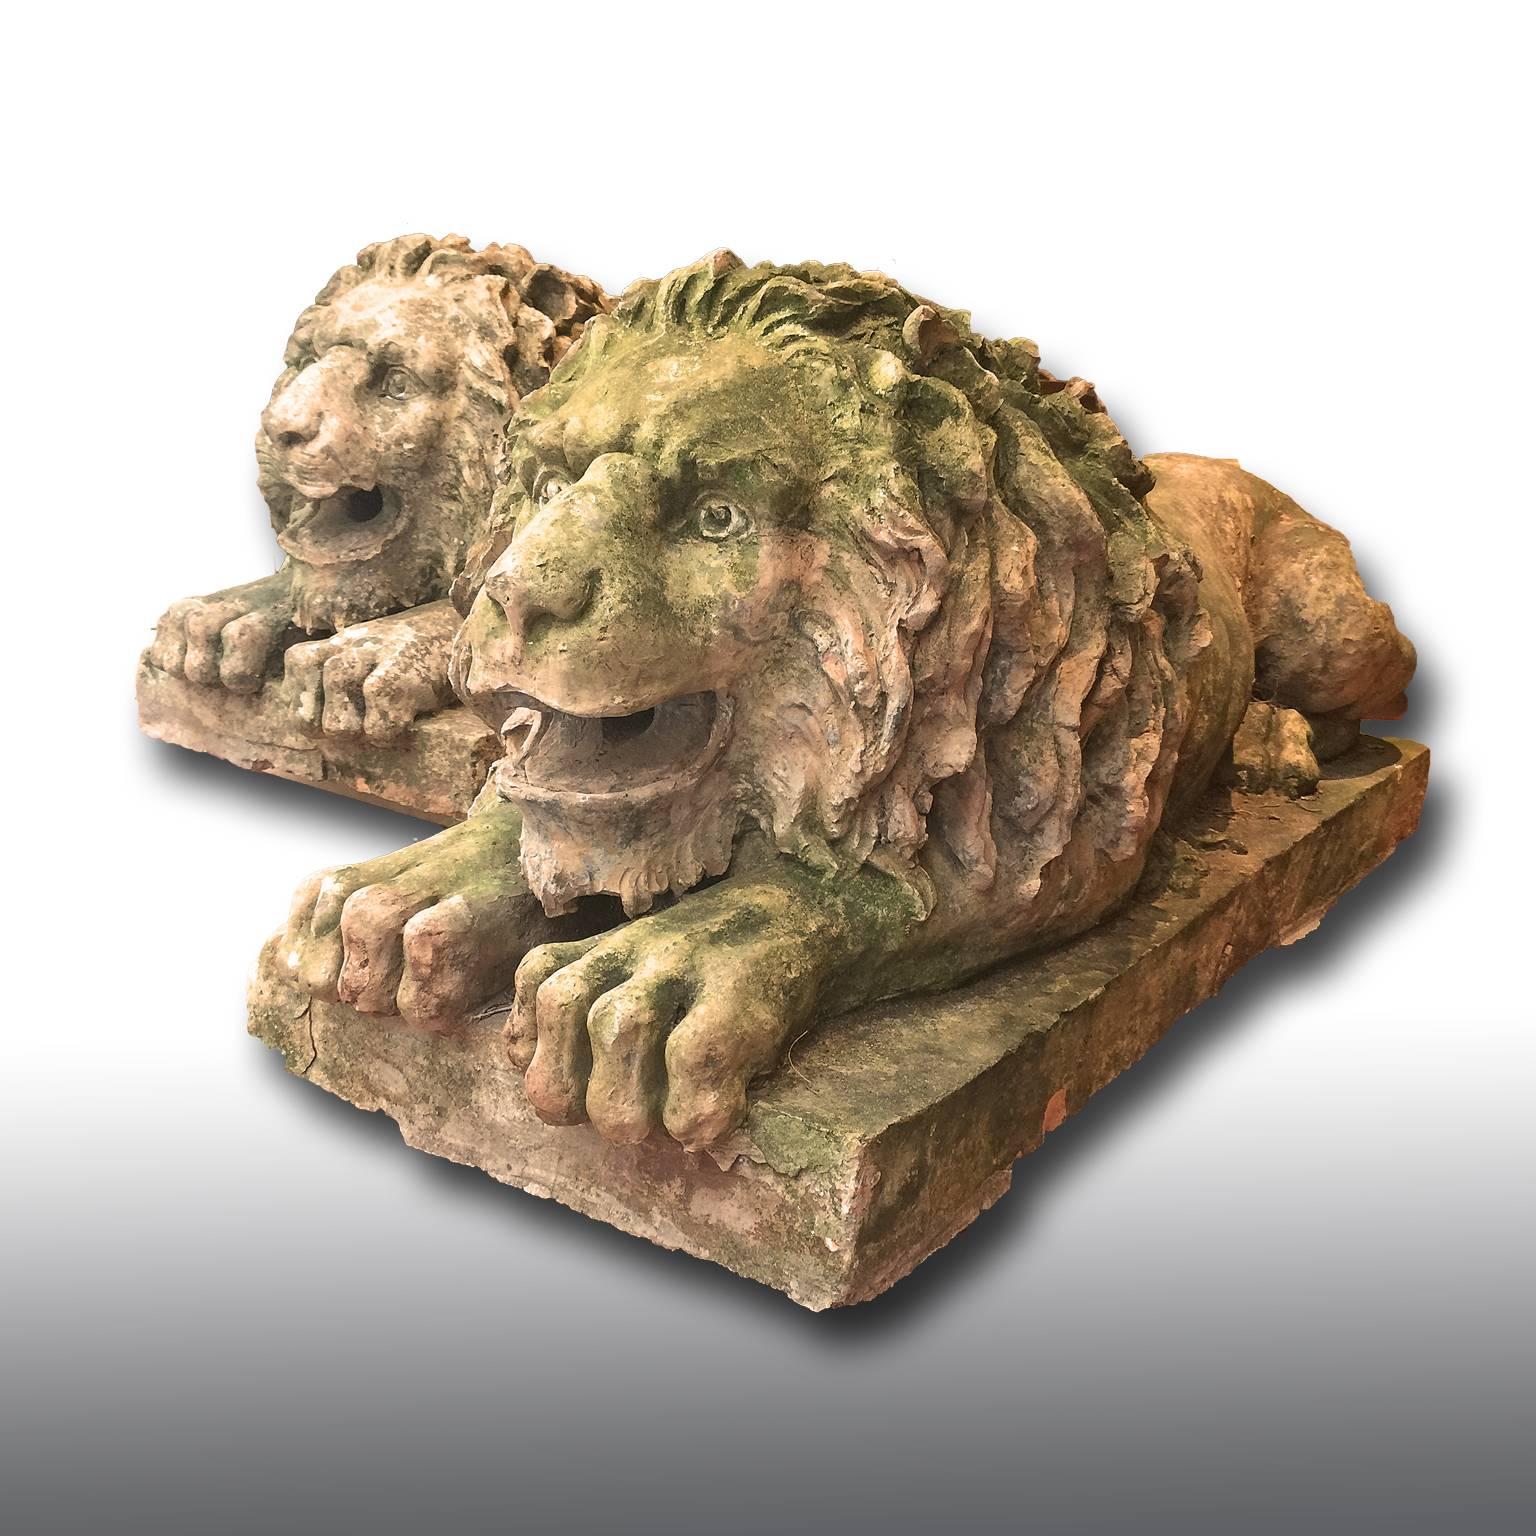 A charming pair of hand-carved terracotta sculptures depicting huddled lions.
This kind of outdoor sculptures usually was placed at the entrance the villas, at large staircases or in the garden.
The sculpture are a stunning eyecatcher indoors as